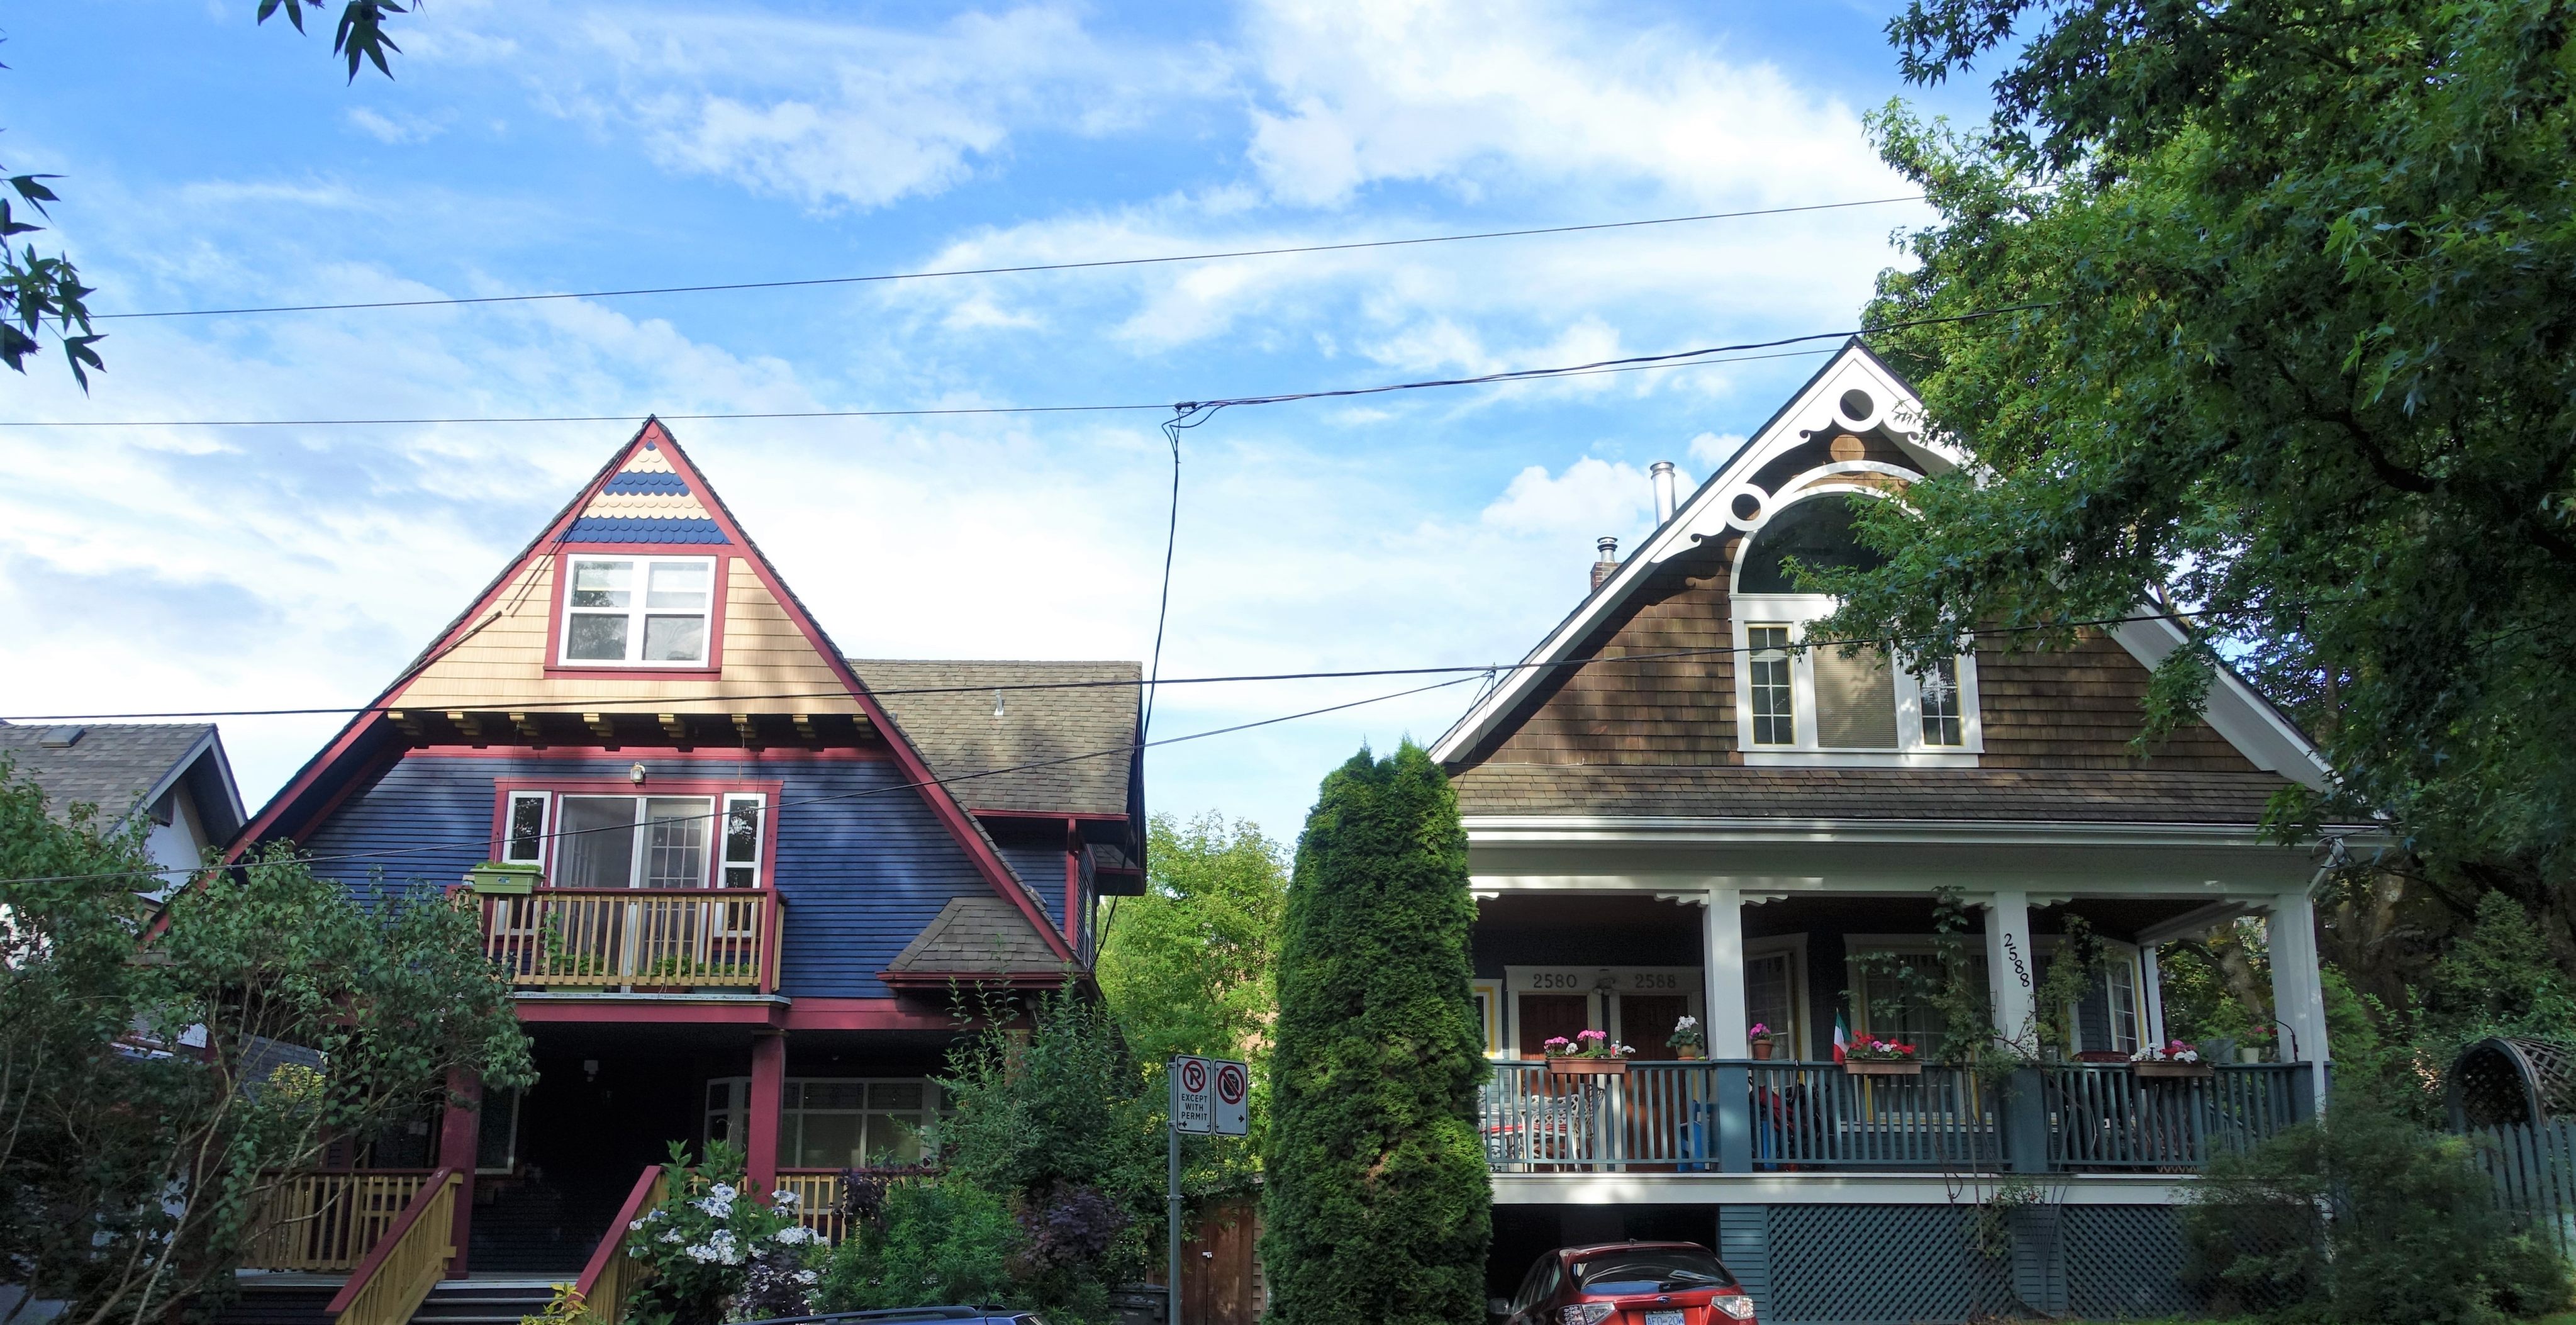 Colourful houses line a street in the Vancouver neighbourhood of Mount Pleasant. Photo: Ian Young